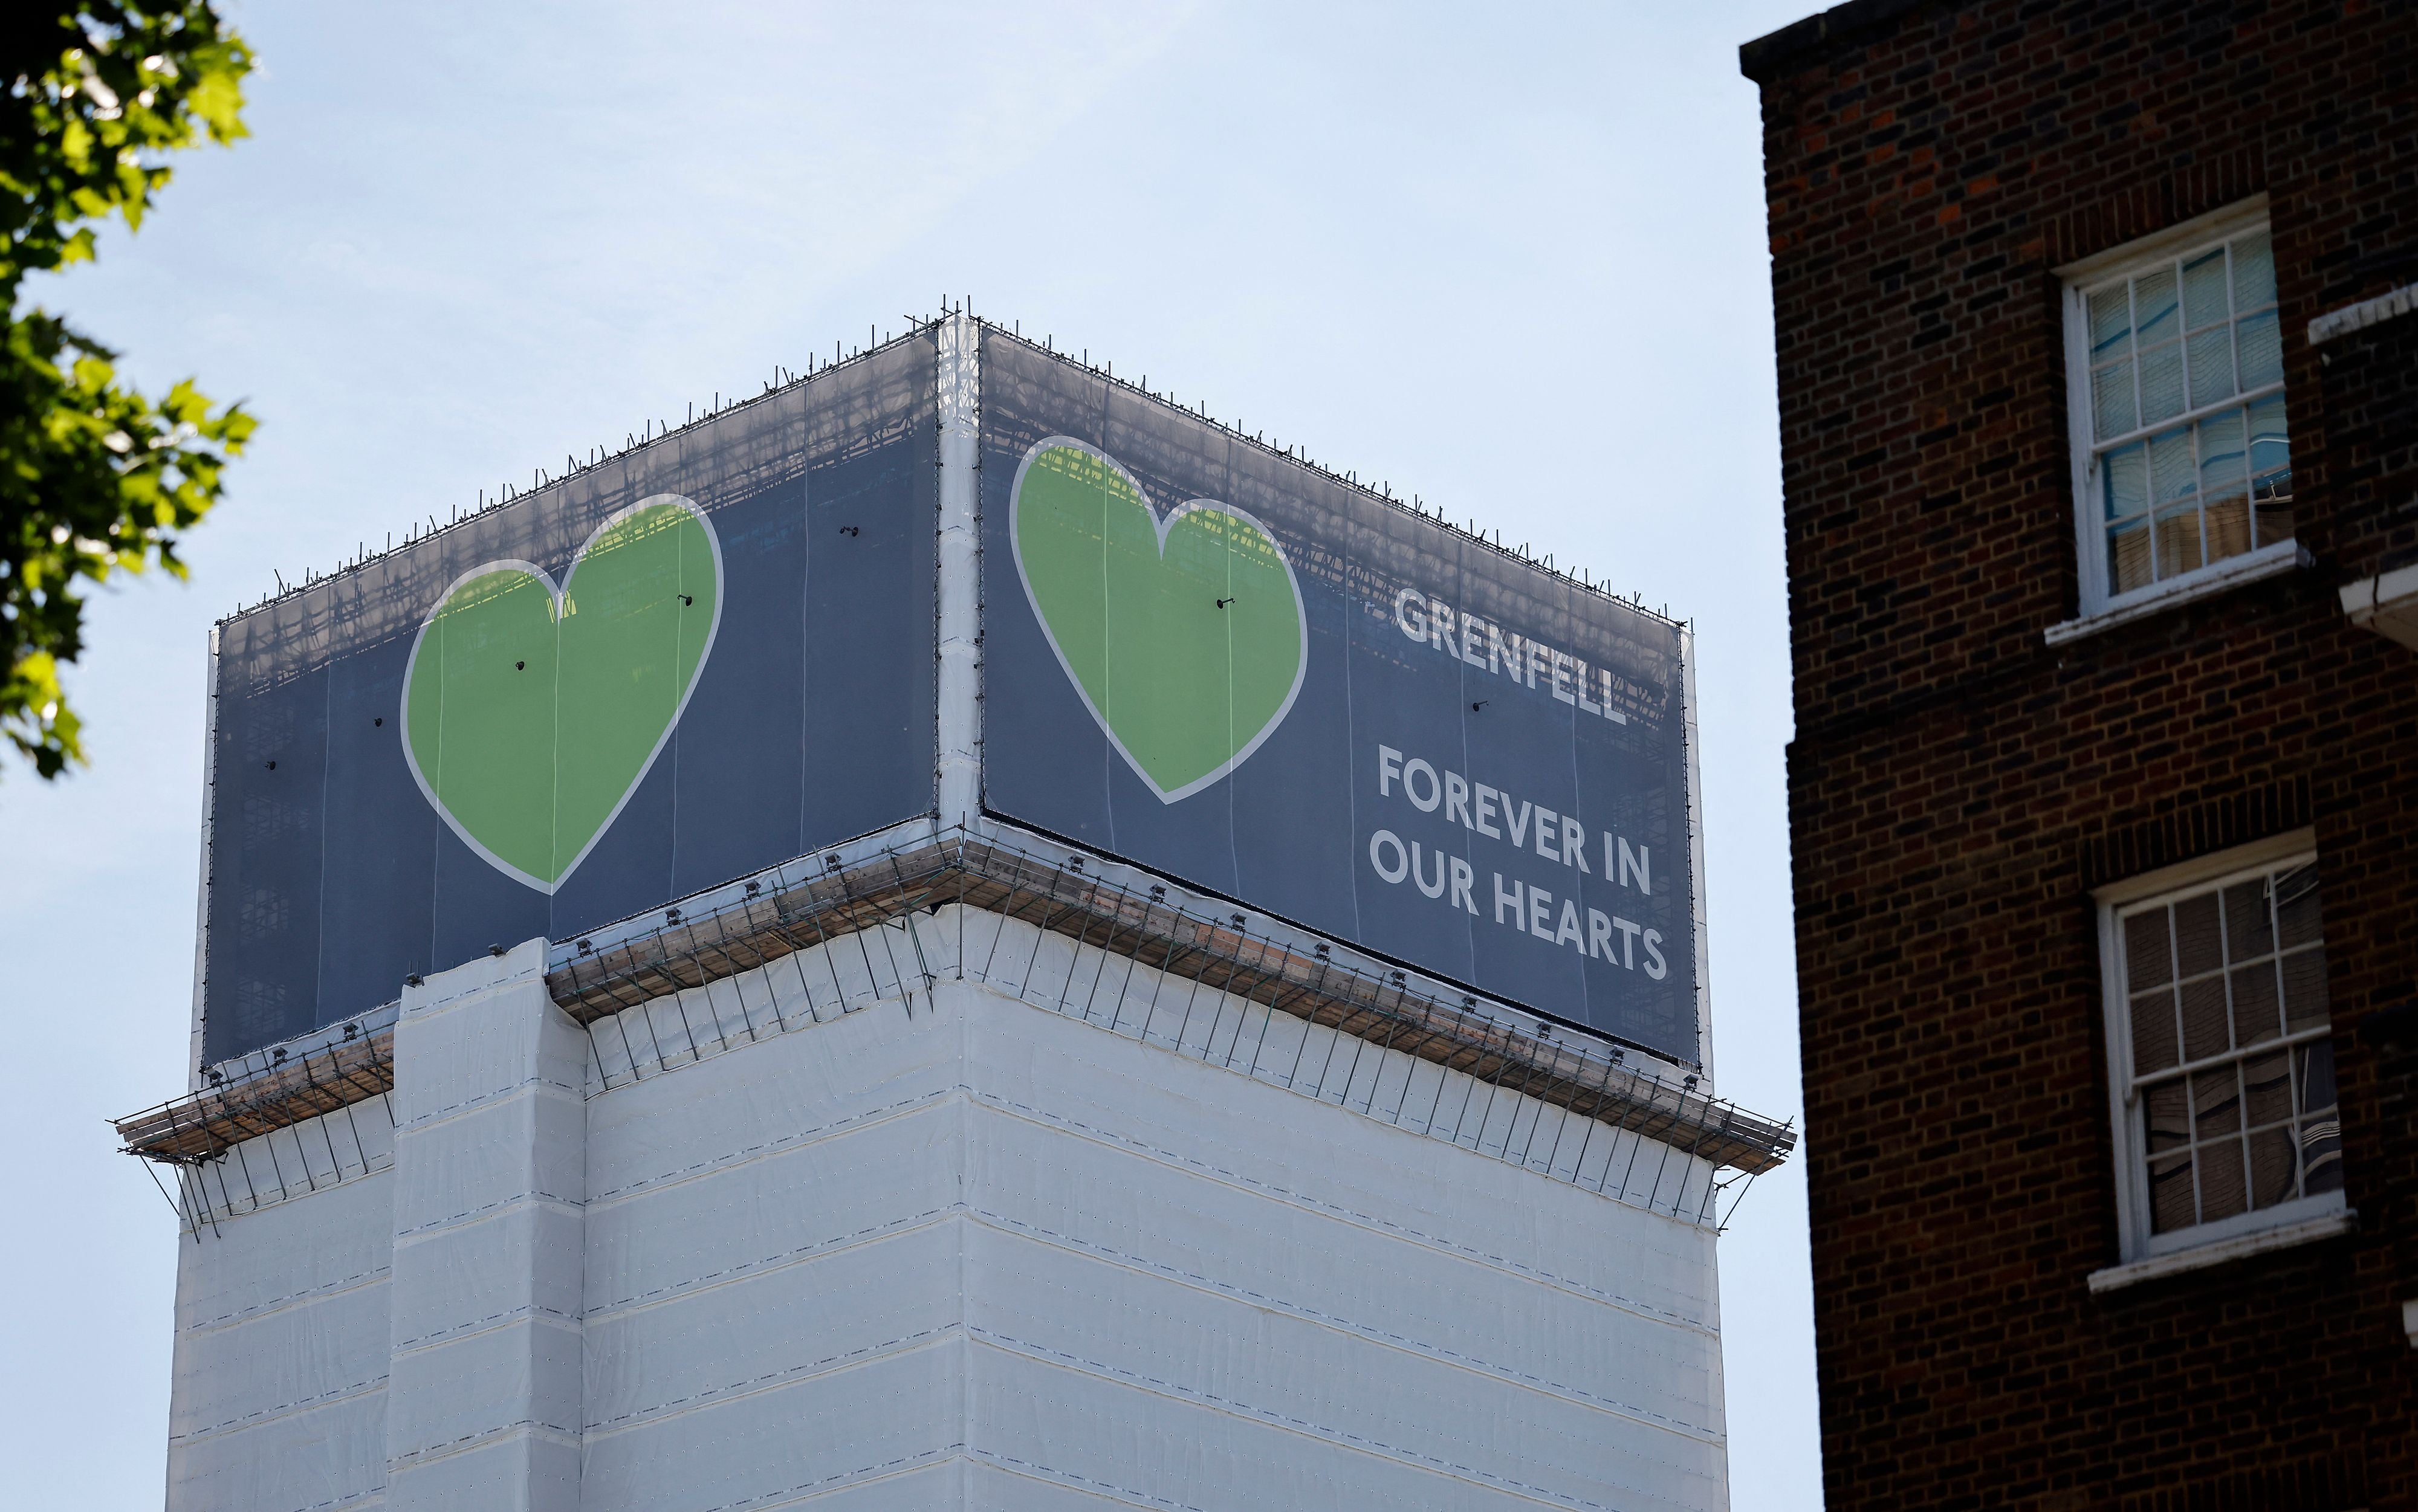 Grenfell Tower pictured in June 2021, four years after a fire in the residential tower block killed 72 people